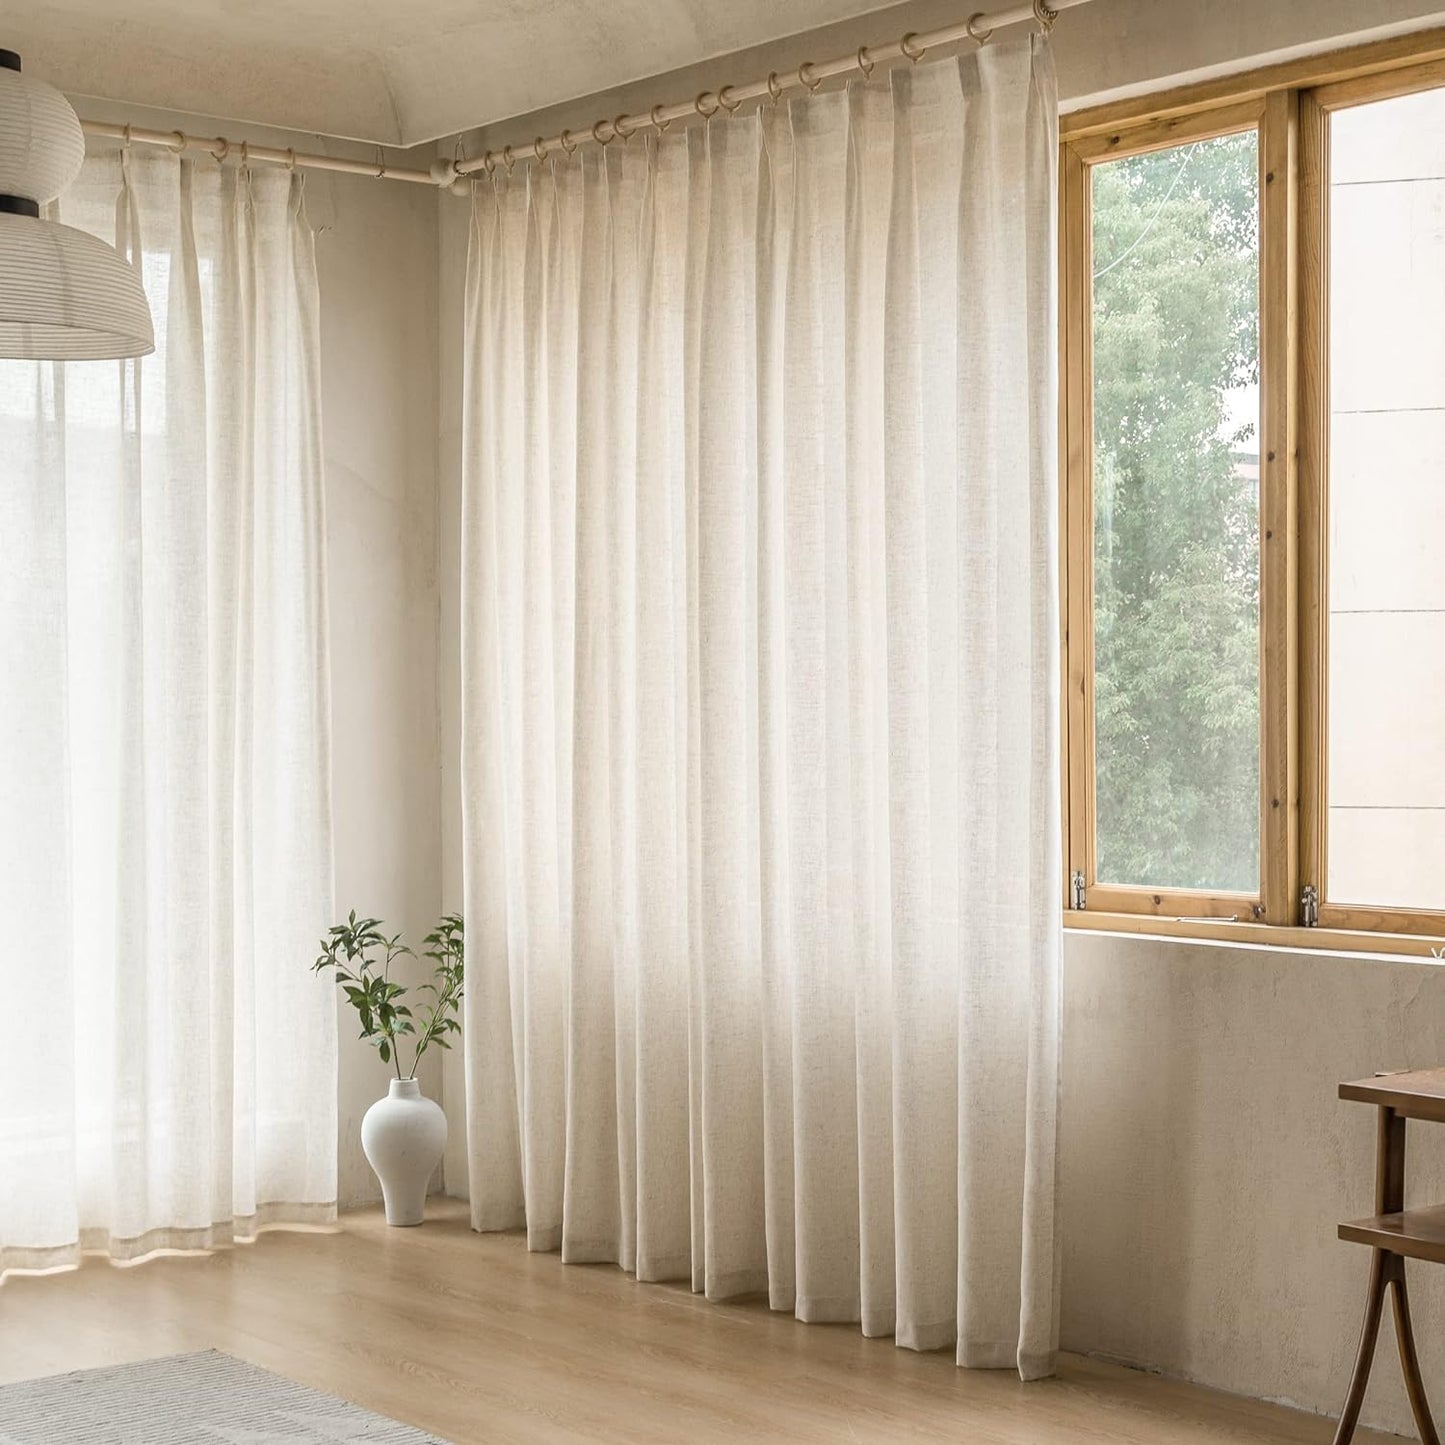 MAIHER Extra Wide Pinch Pleated Drapes 108 Inches Long, Faux Linen Light Filtering Semi Sheer Curtains with Hooks for Living Room Bedroom, Natural Linen (1 Panel, 100 W X 108 L)  MAIHER Linen 54X80 